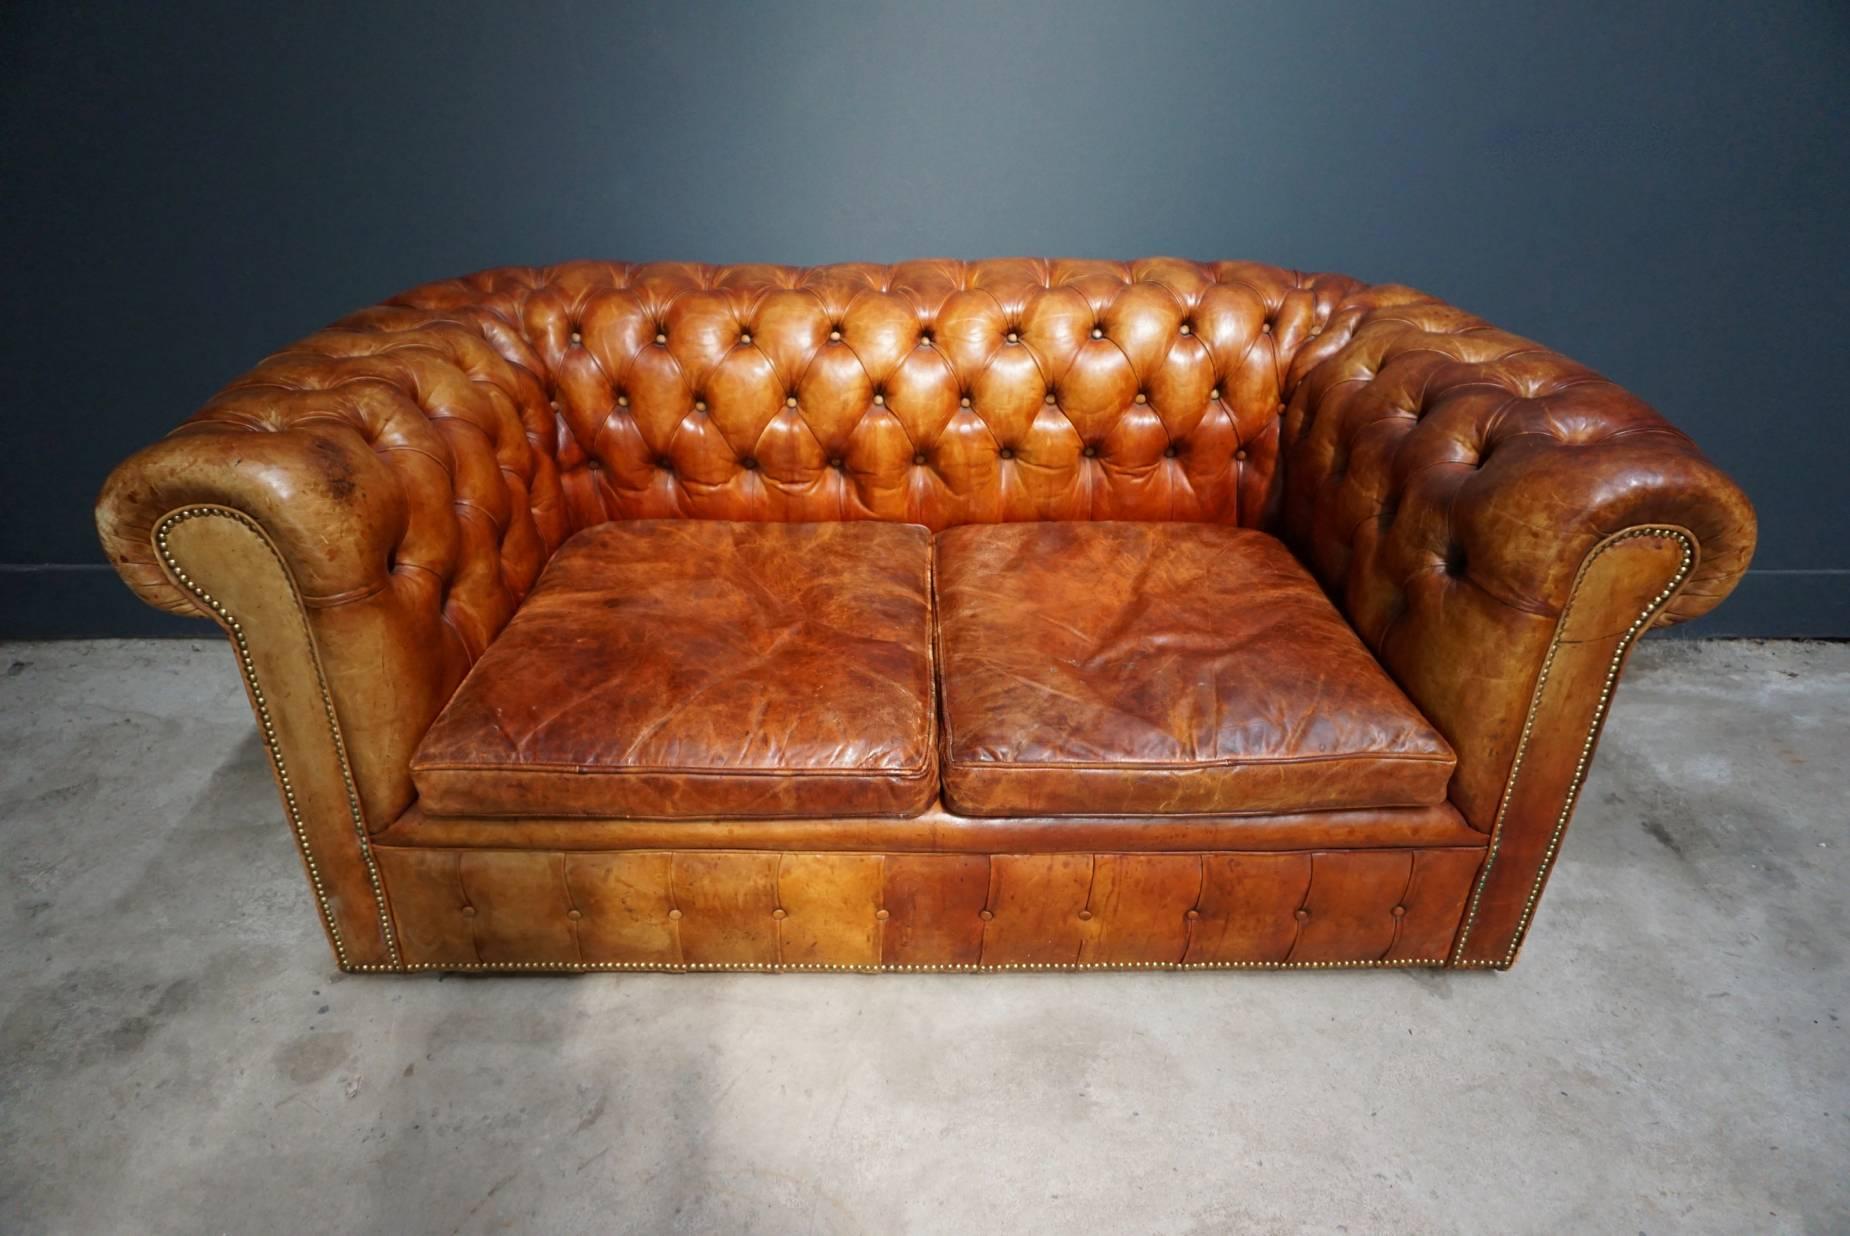 British Vintage Midcentury Cognac Leather Two-Seat Chesterfield Sofa